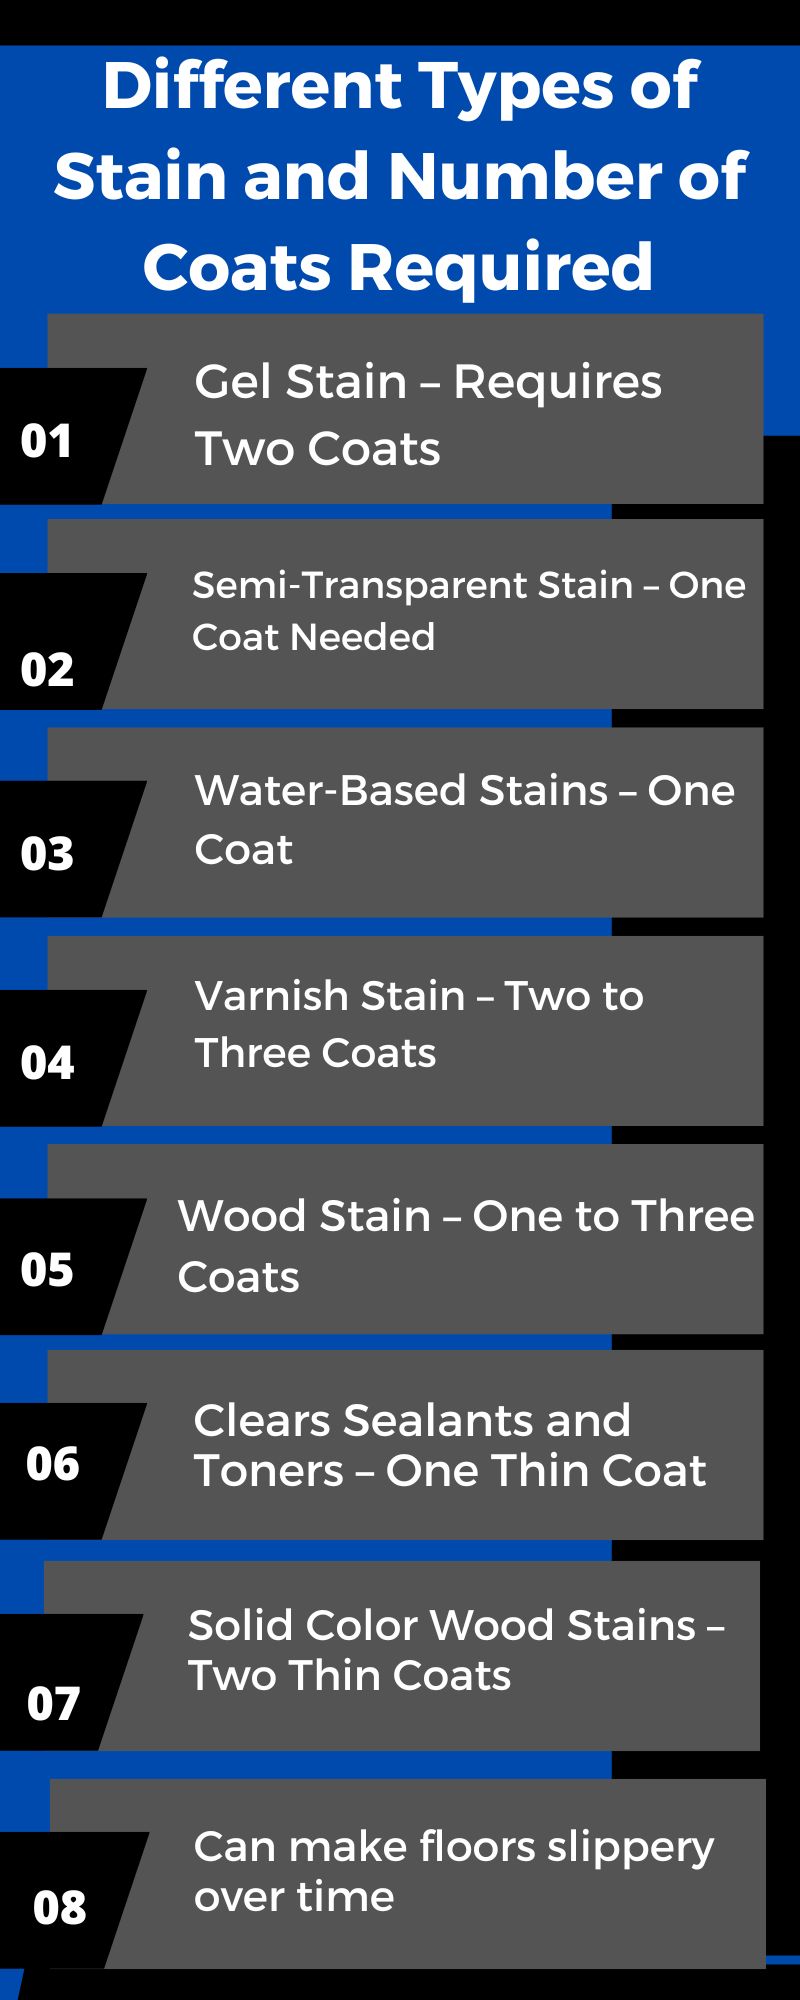 Different Types of Stain and Number of Coats Required